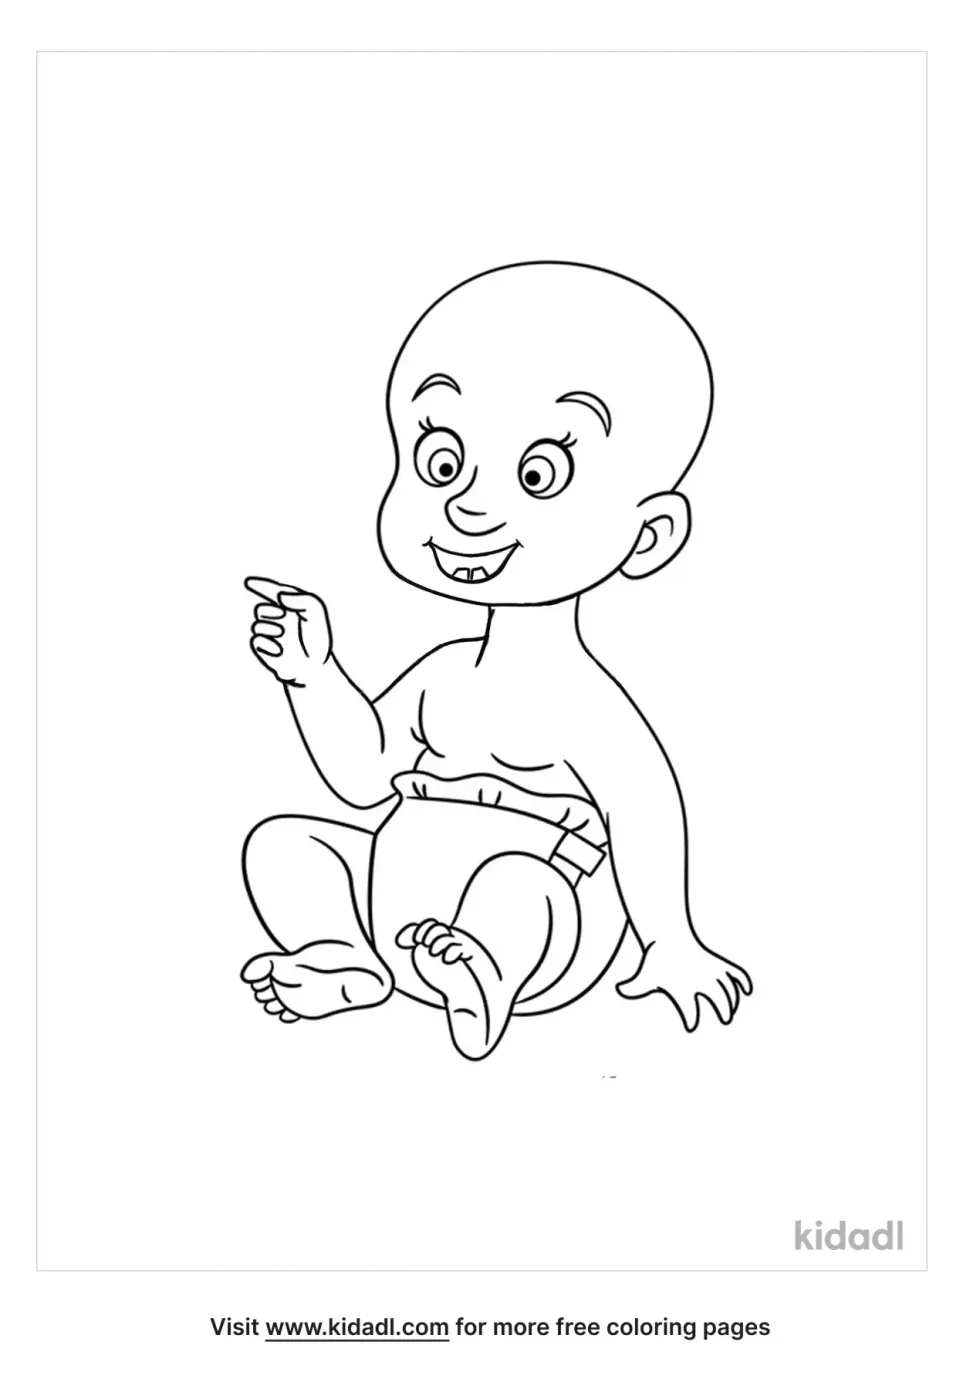 Baby In Diaper Coloring Page